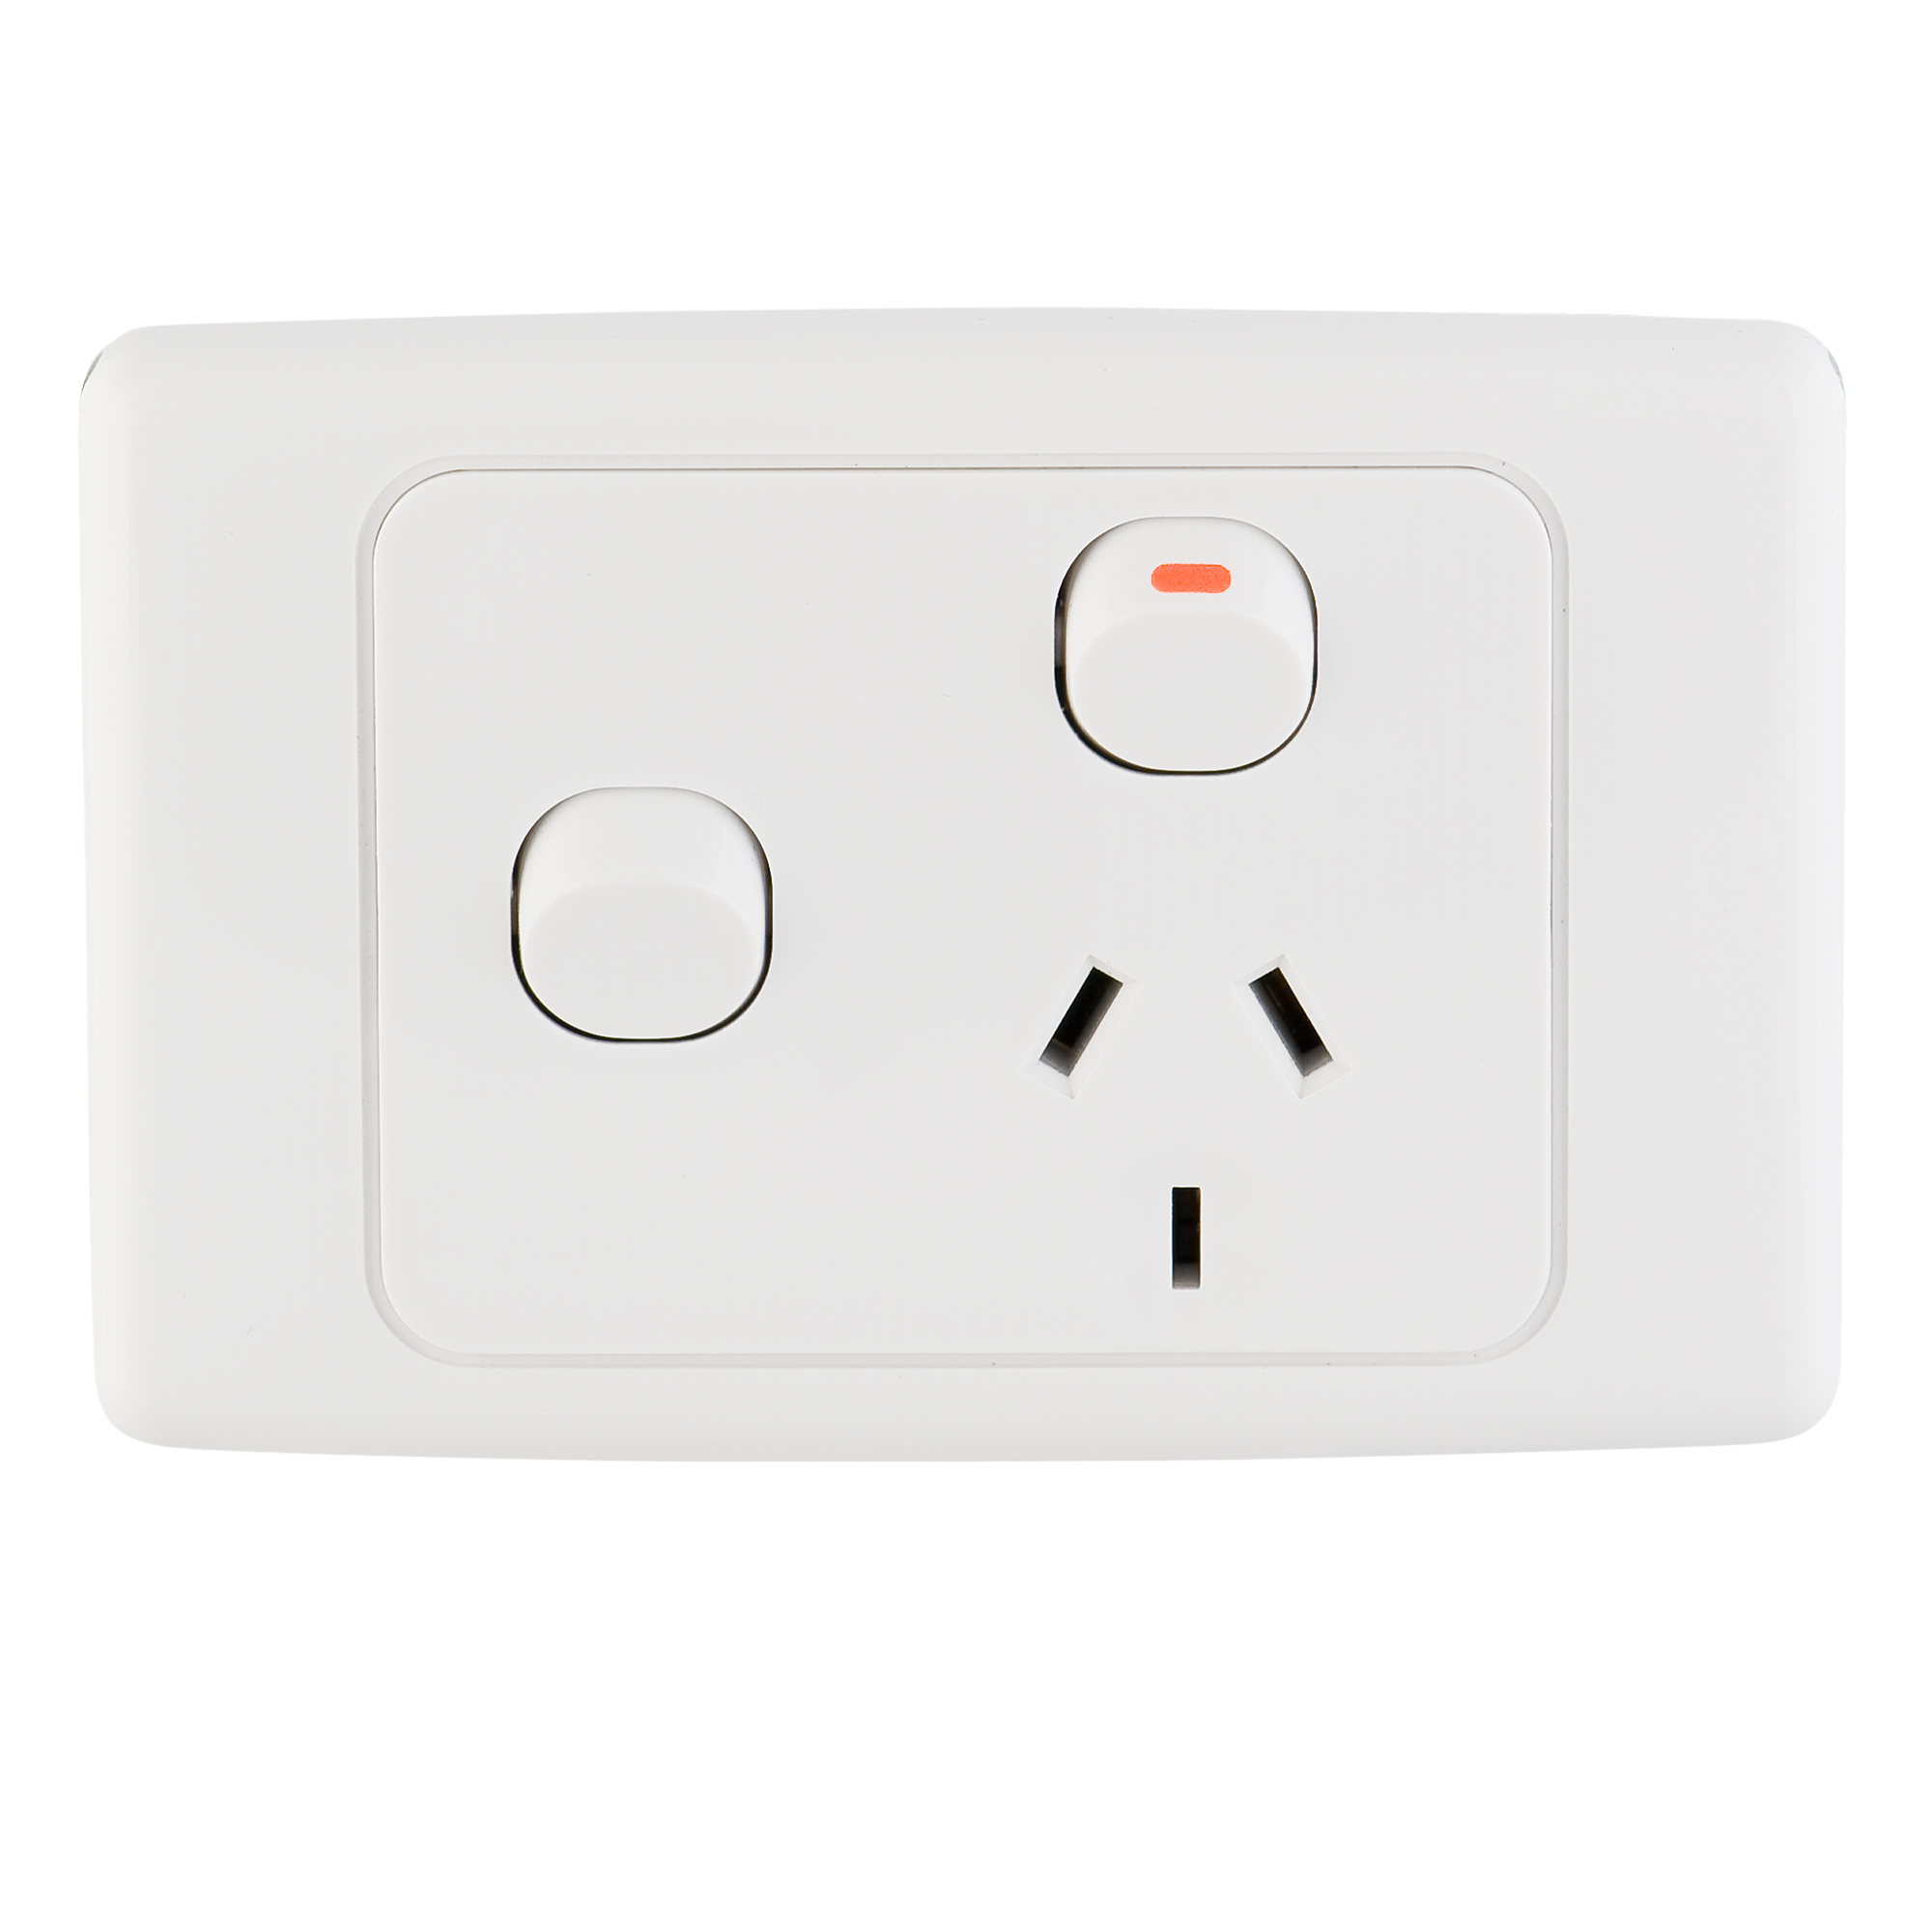  Single power point with switch